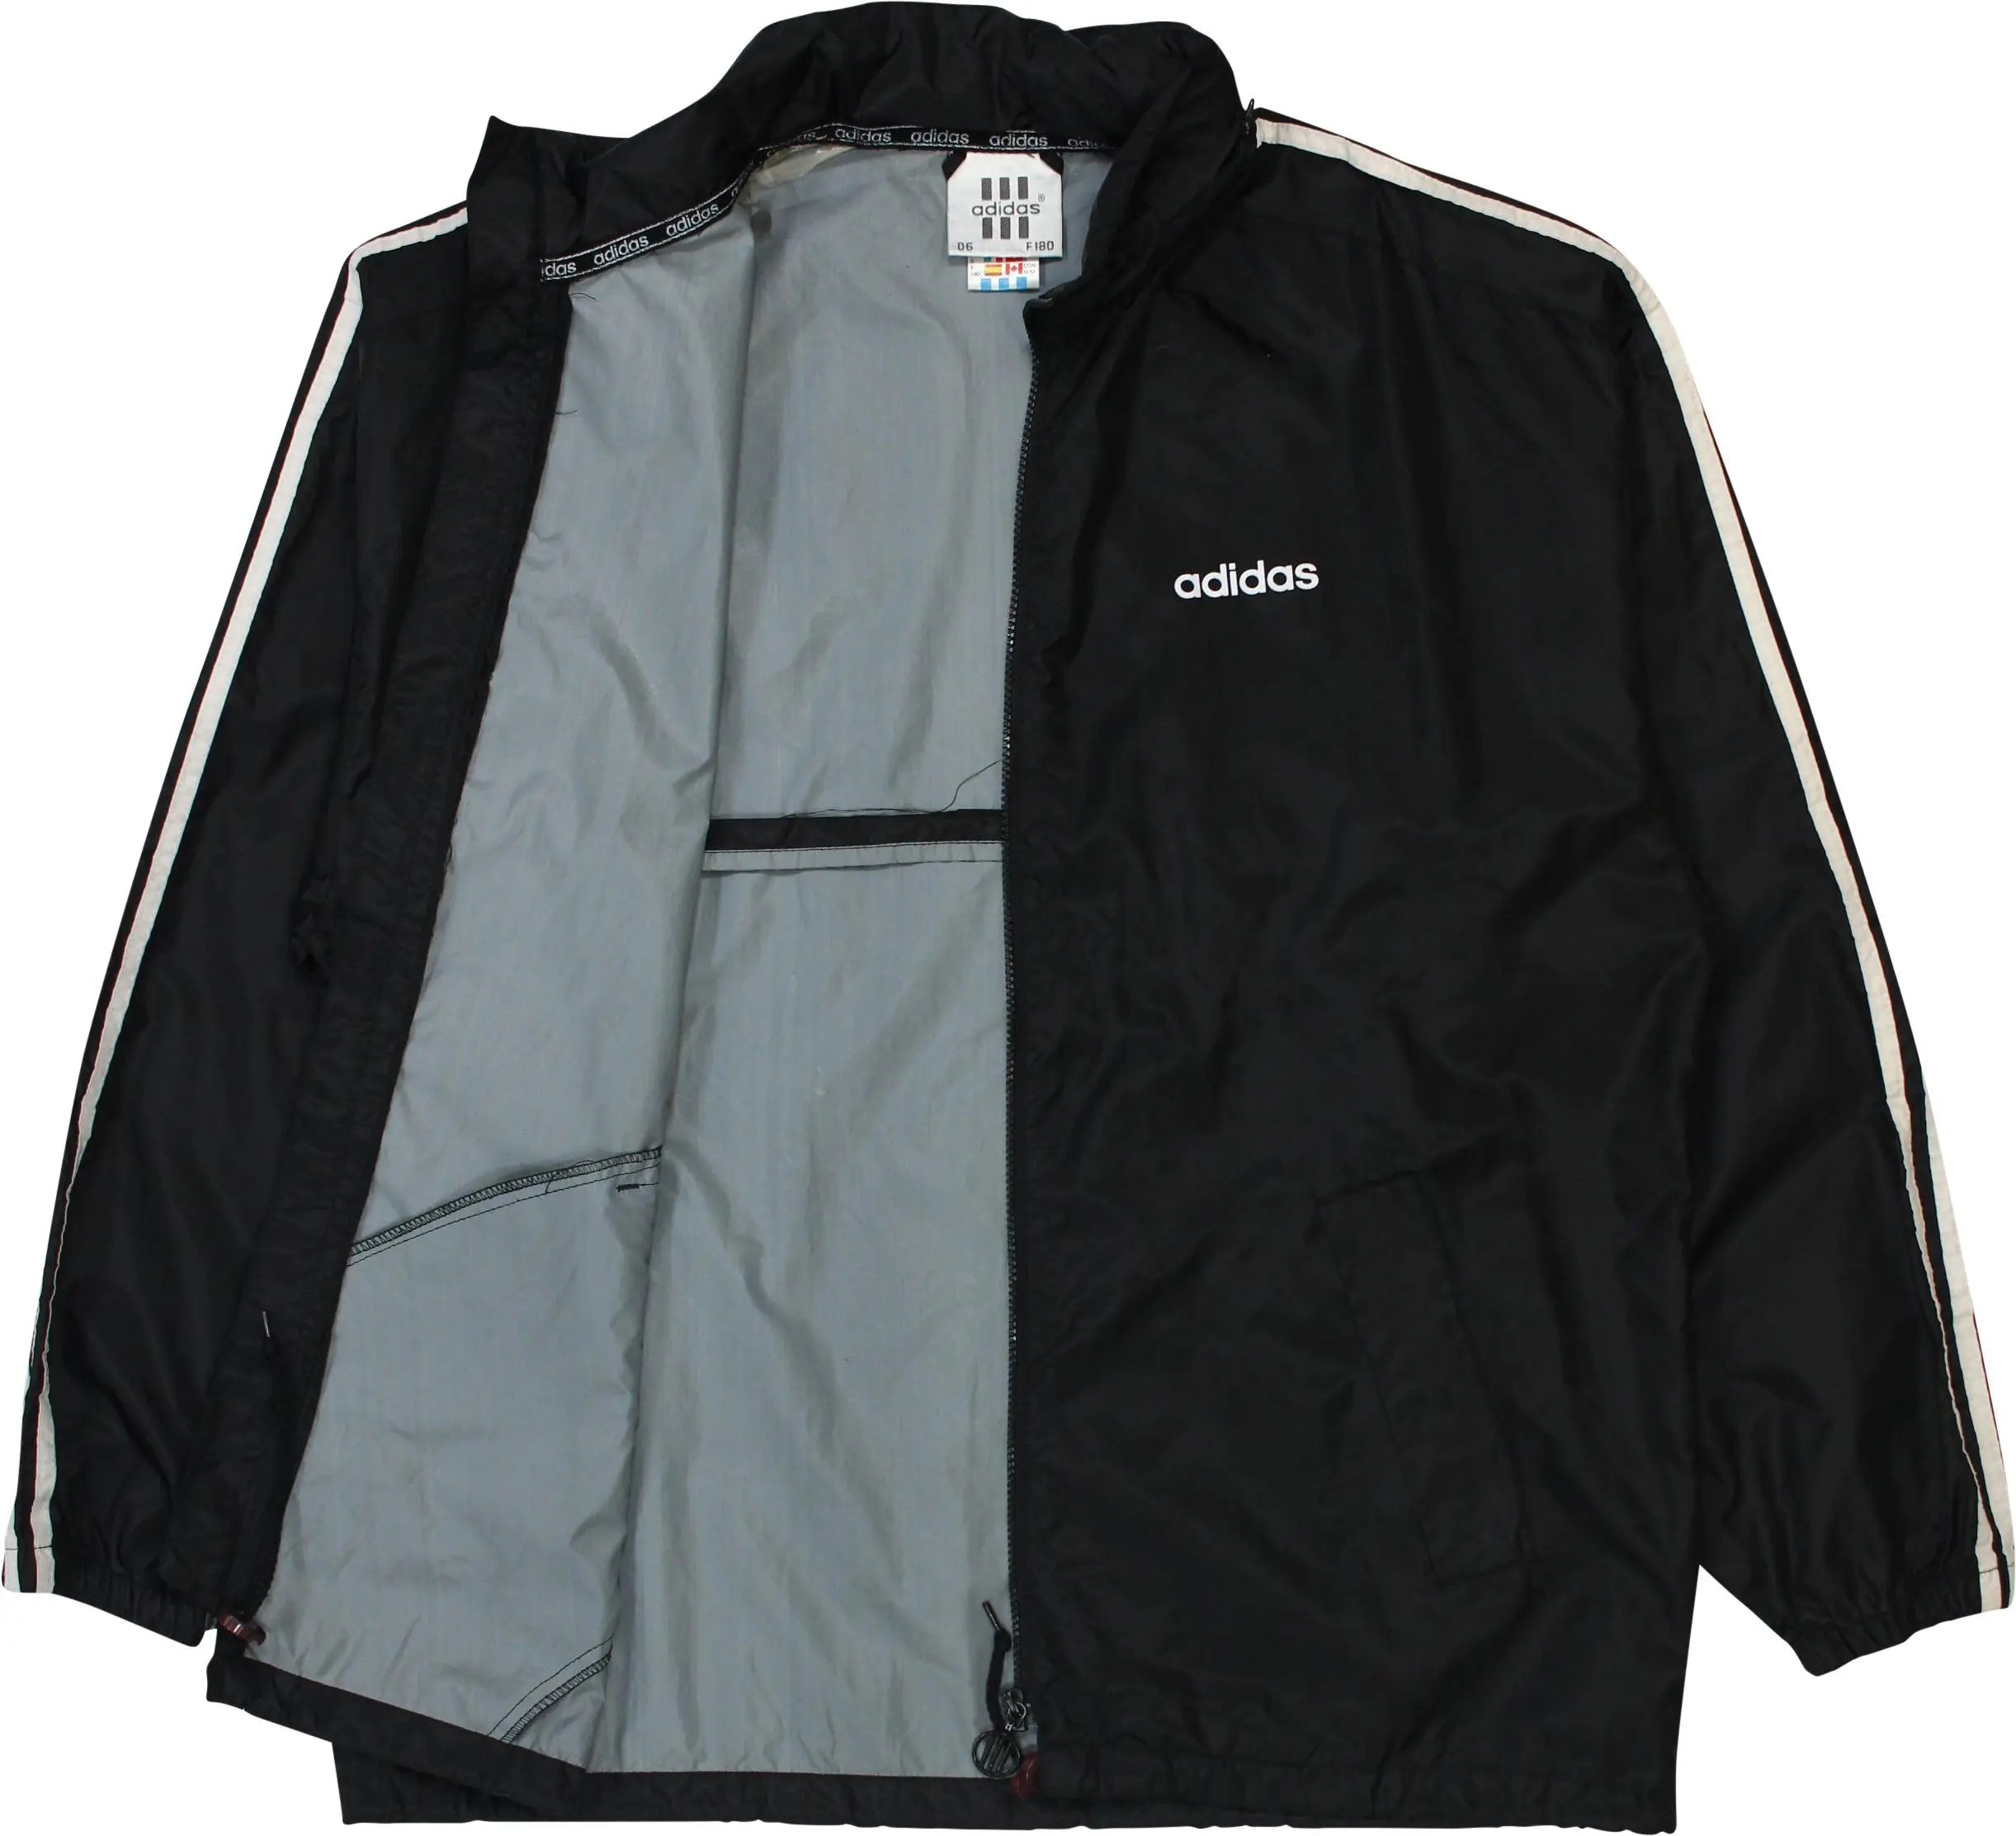 Adidas - Black Rain Jacket & Pants by Adidas- ThriftTale.com - Vintage and second handclothing